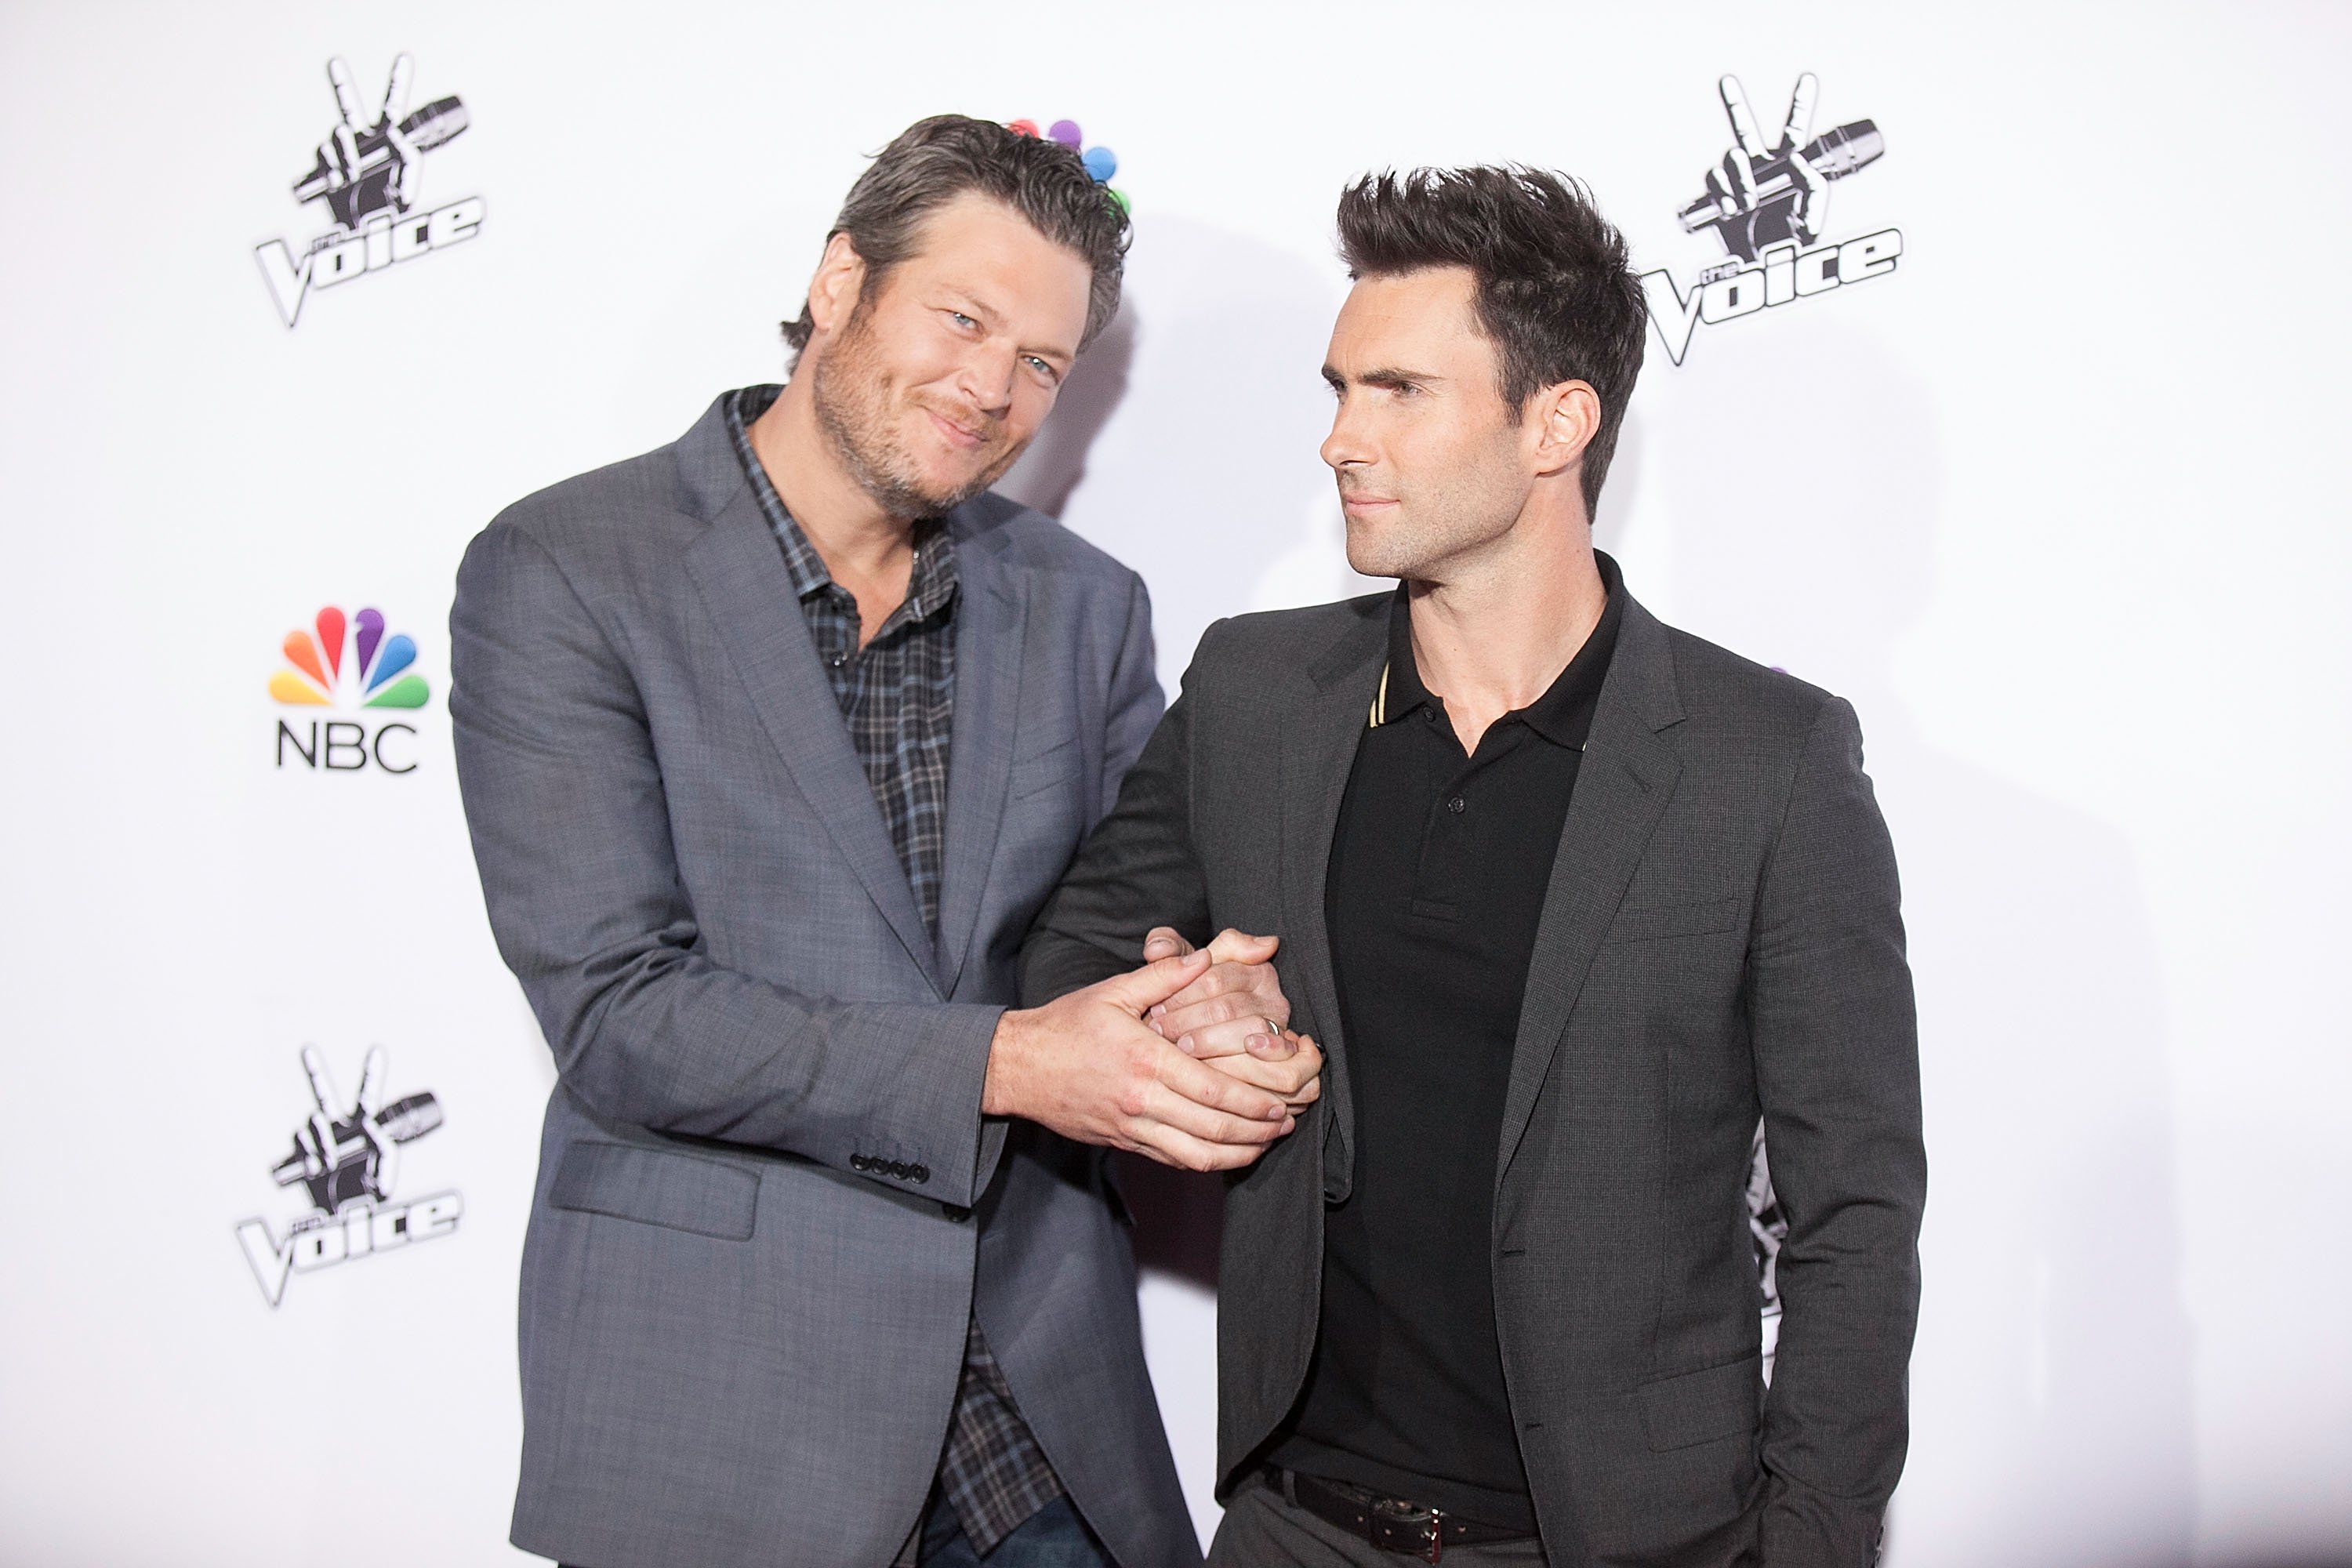 Blake Shelton and Adam Levine at "The Voice" Season 7 Red Carpet Event on November 24, 2014 | Photo: GettyImages